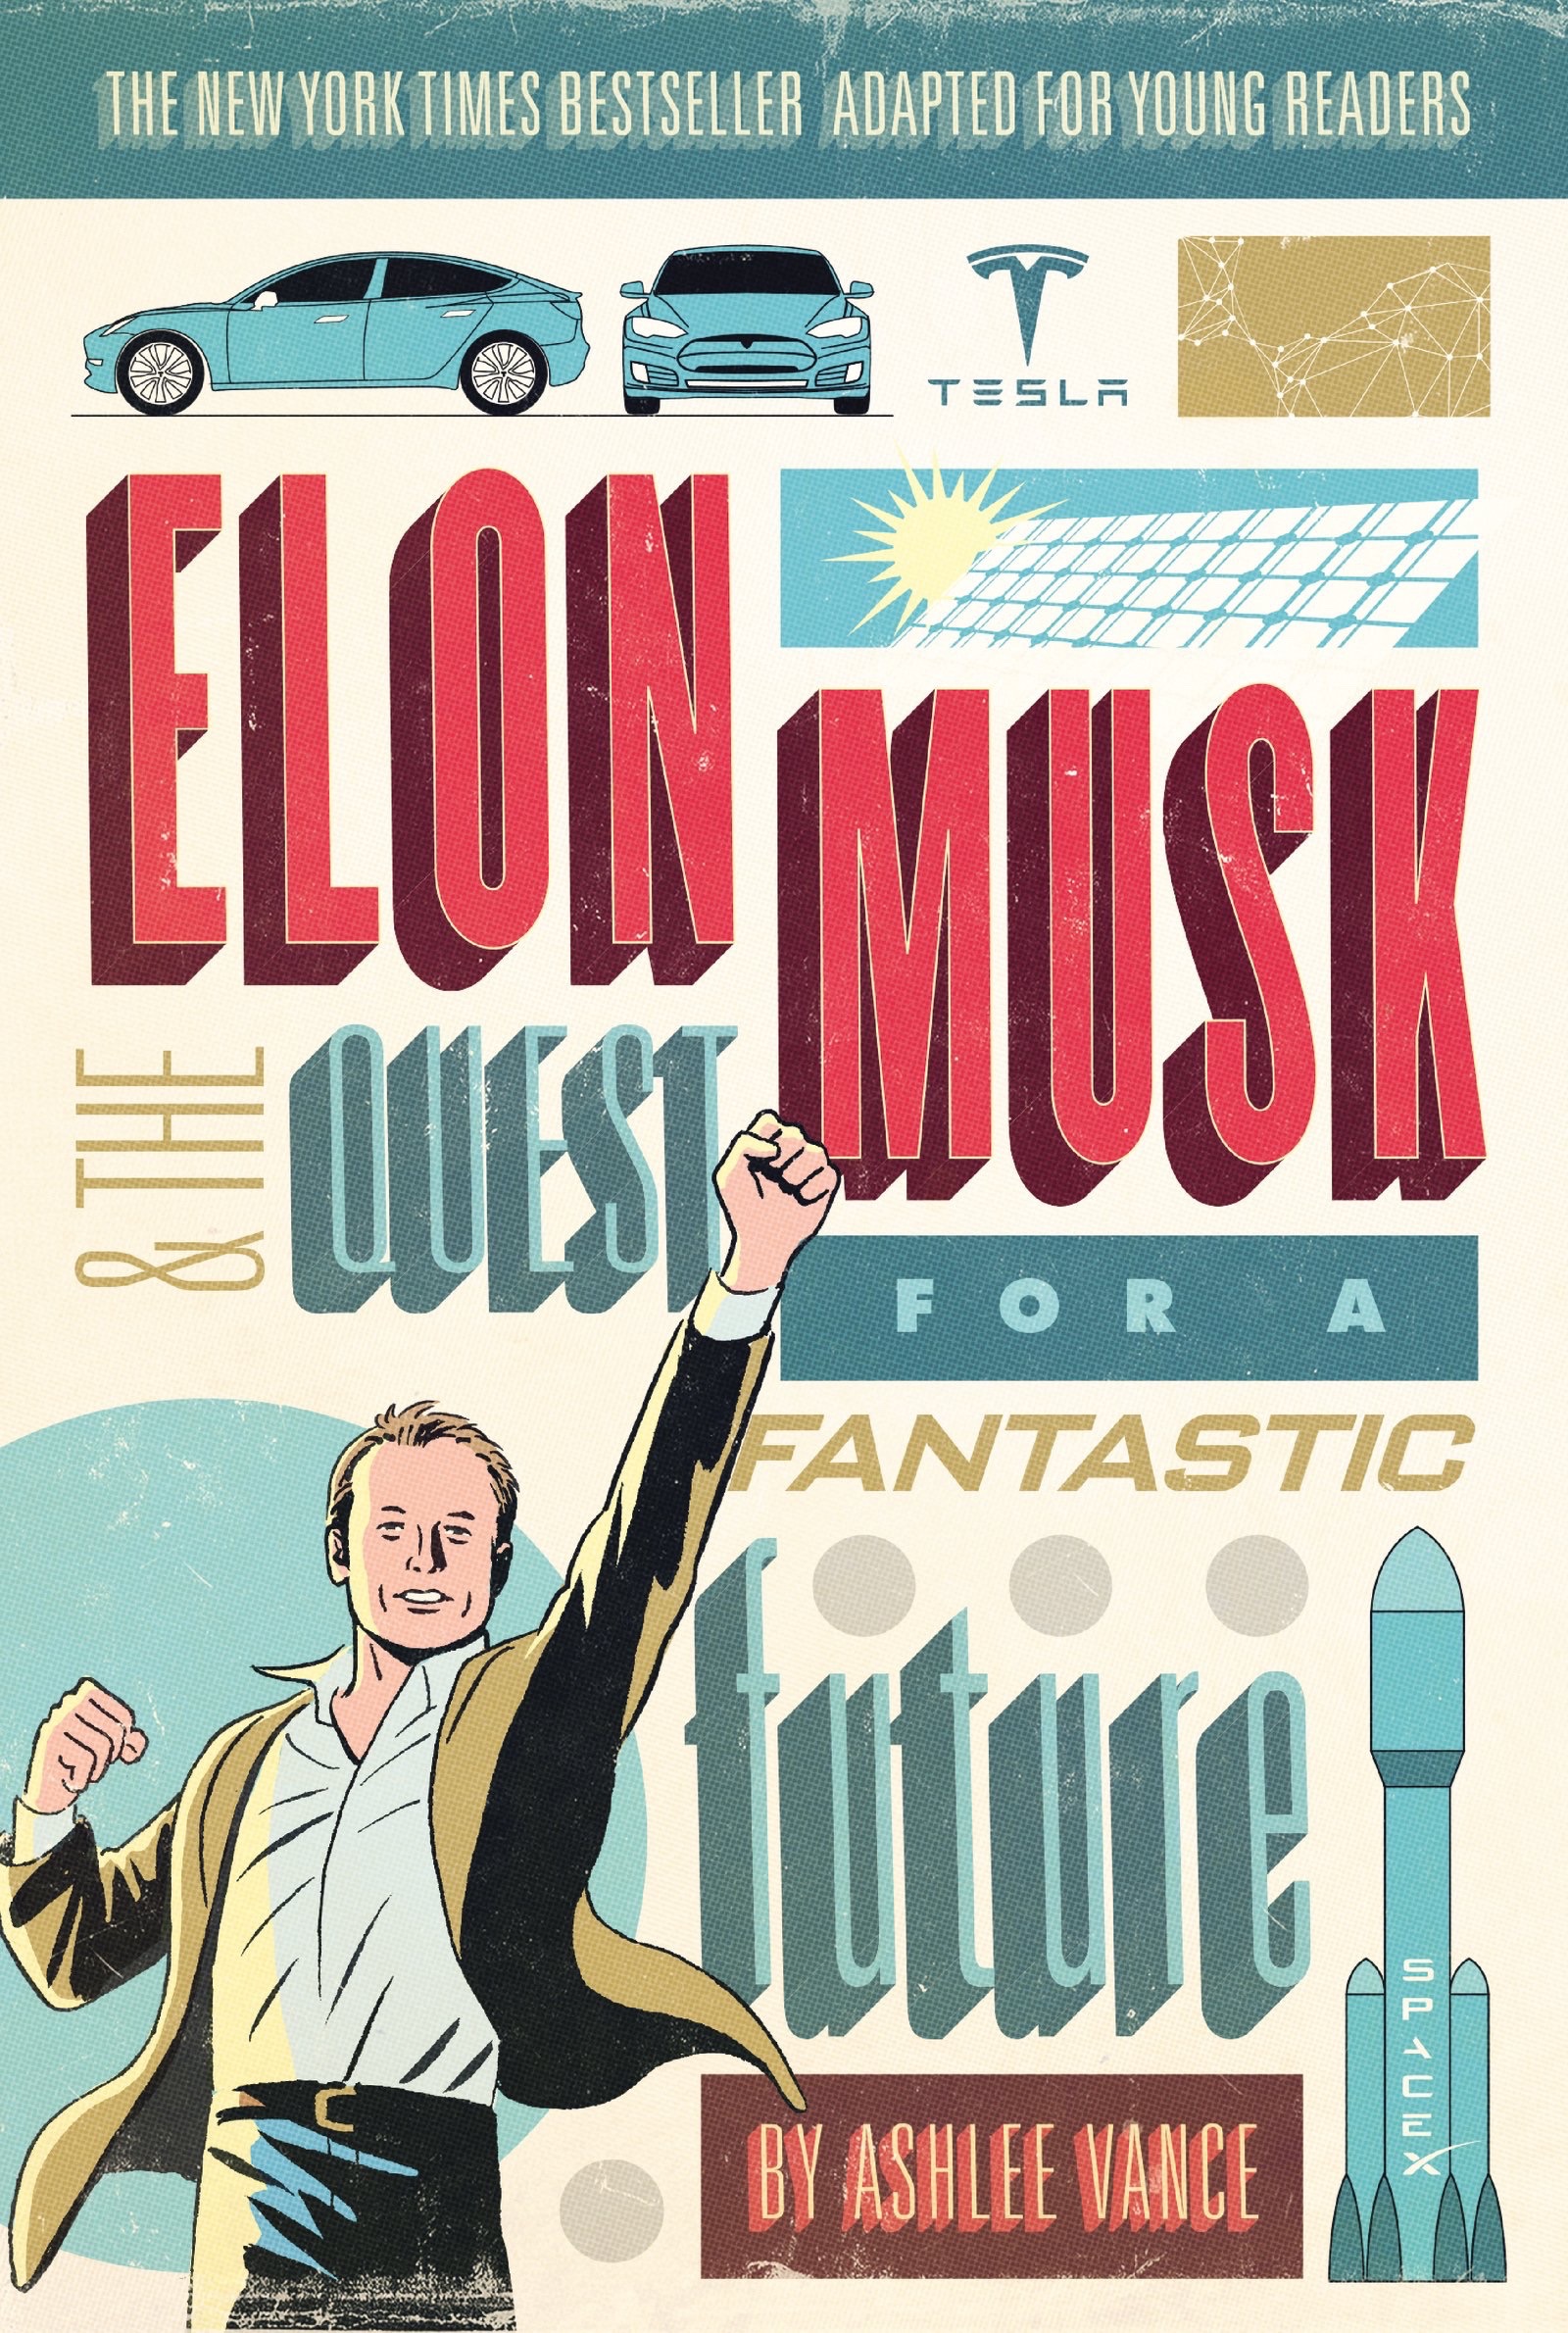 Book: Young entrepreneurs can get inspired by Elon Musk